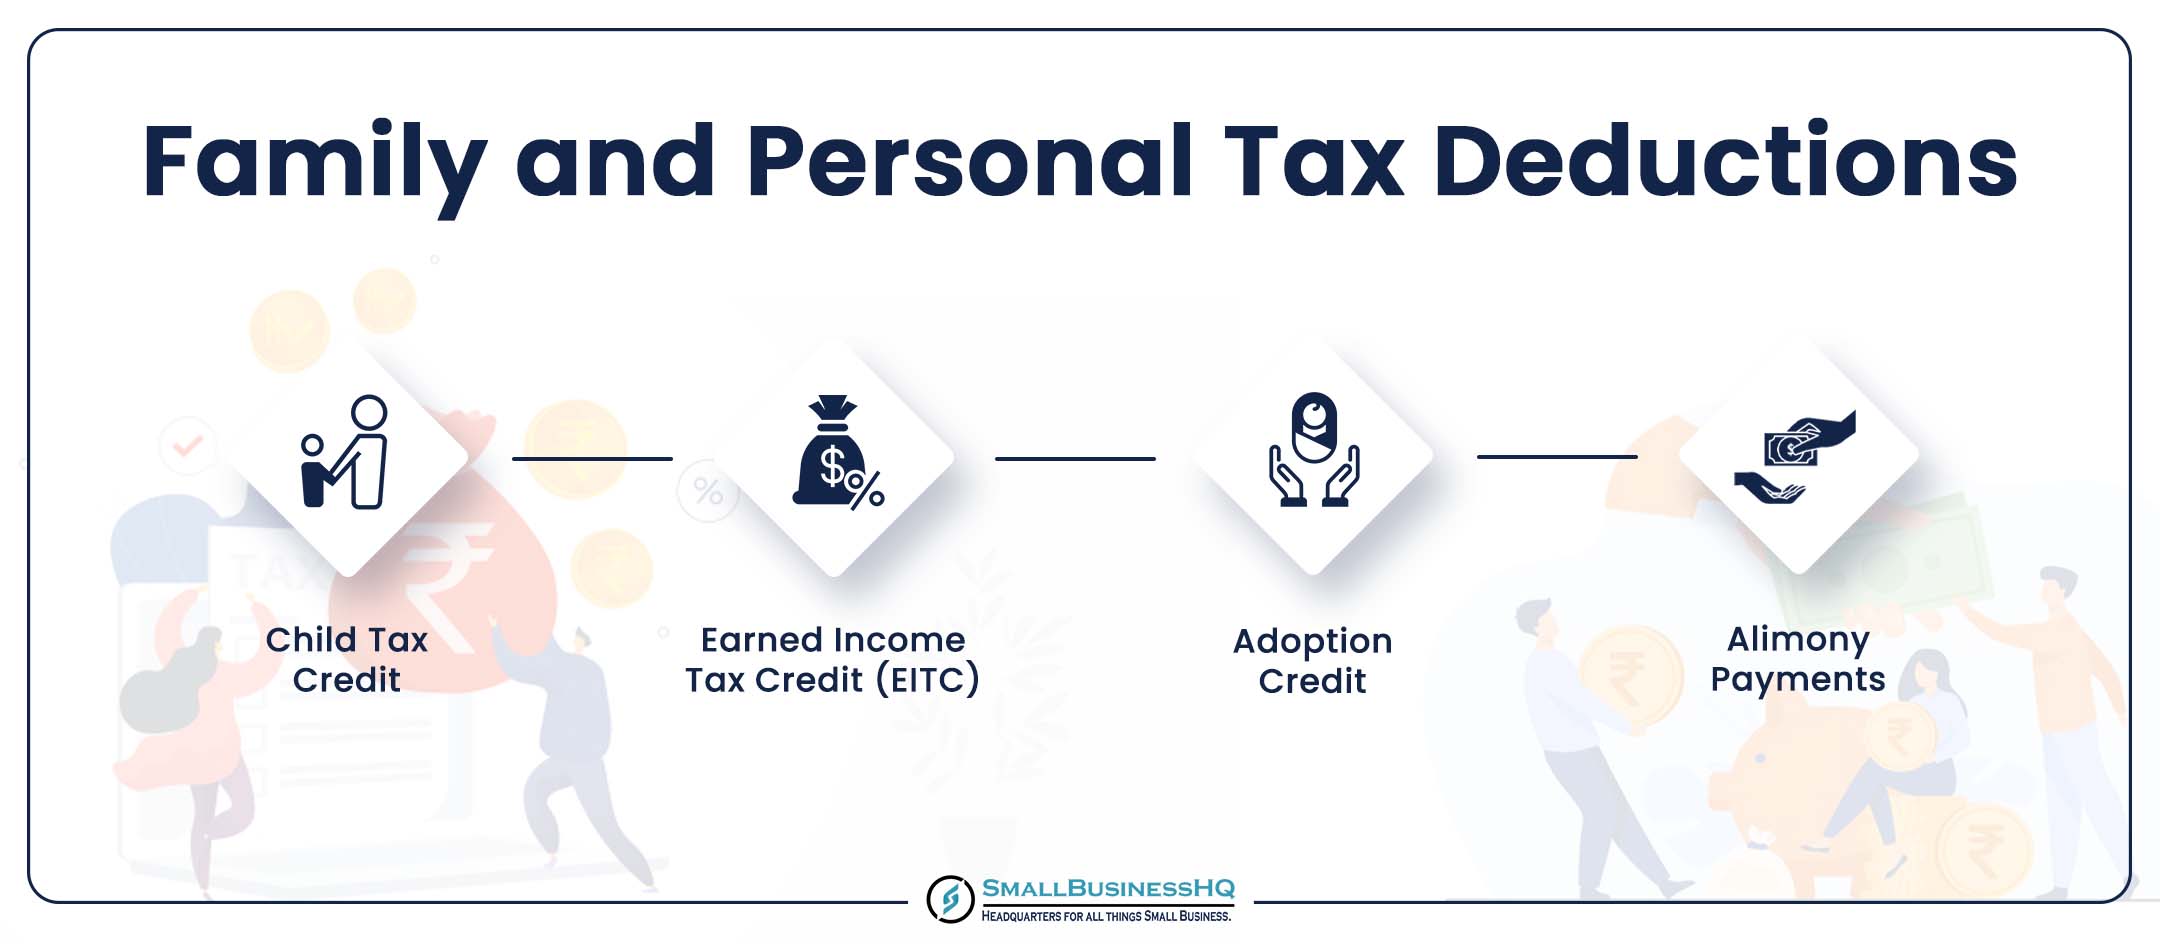 Family and Personal Tax Deductions